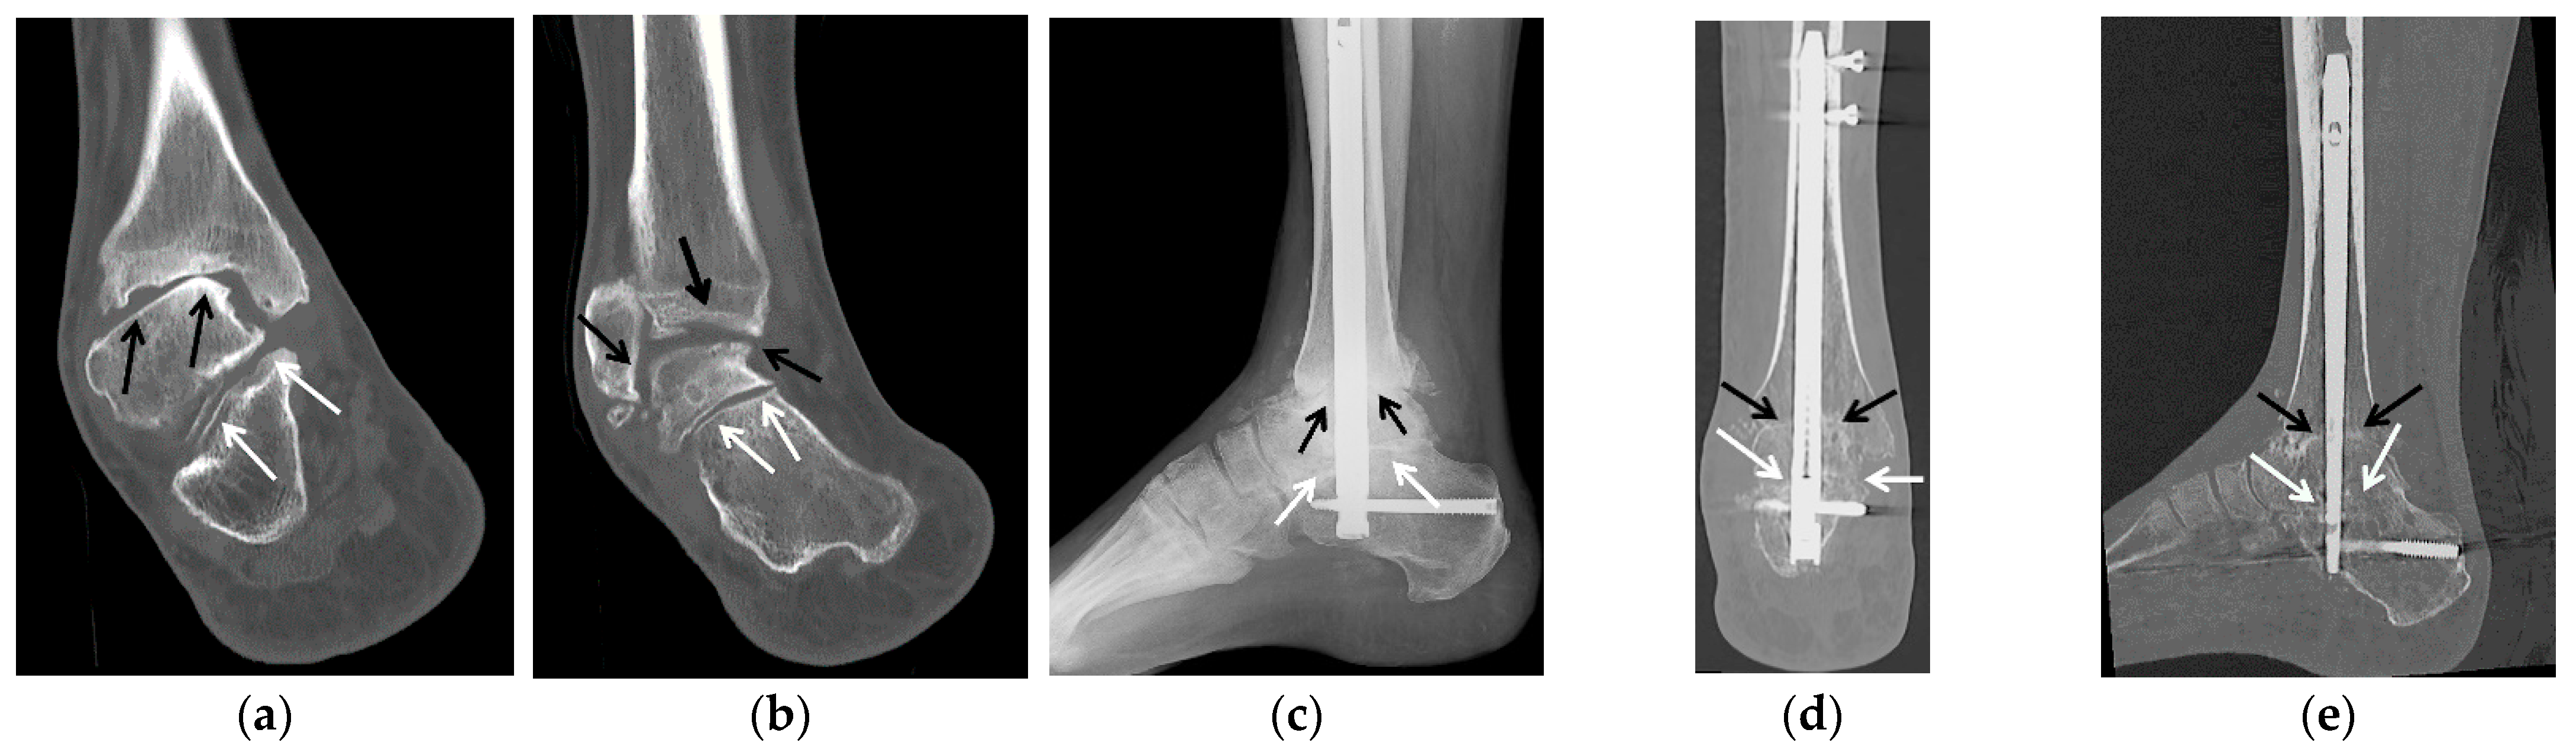 JCM | Free Full-Text | Imaging and Treatment of Posttraumatic Ankle and  Hindfoot Osteoarthritis